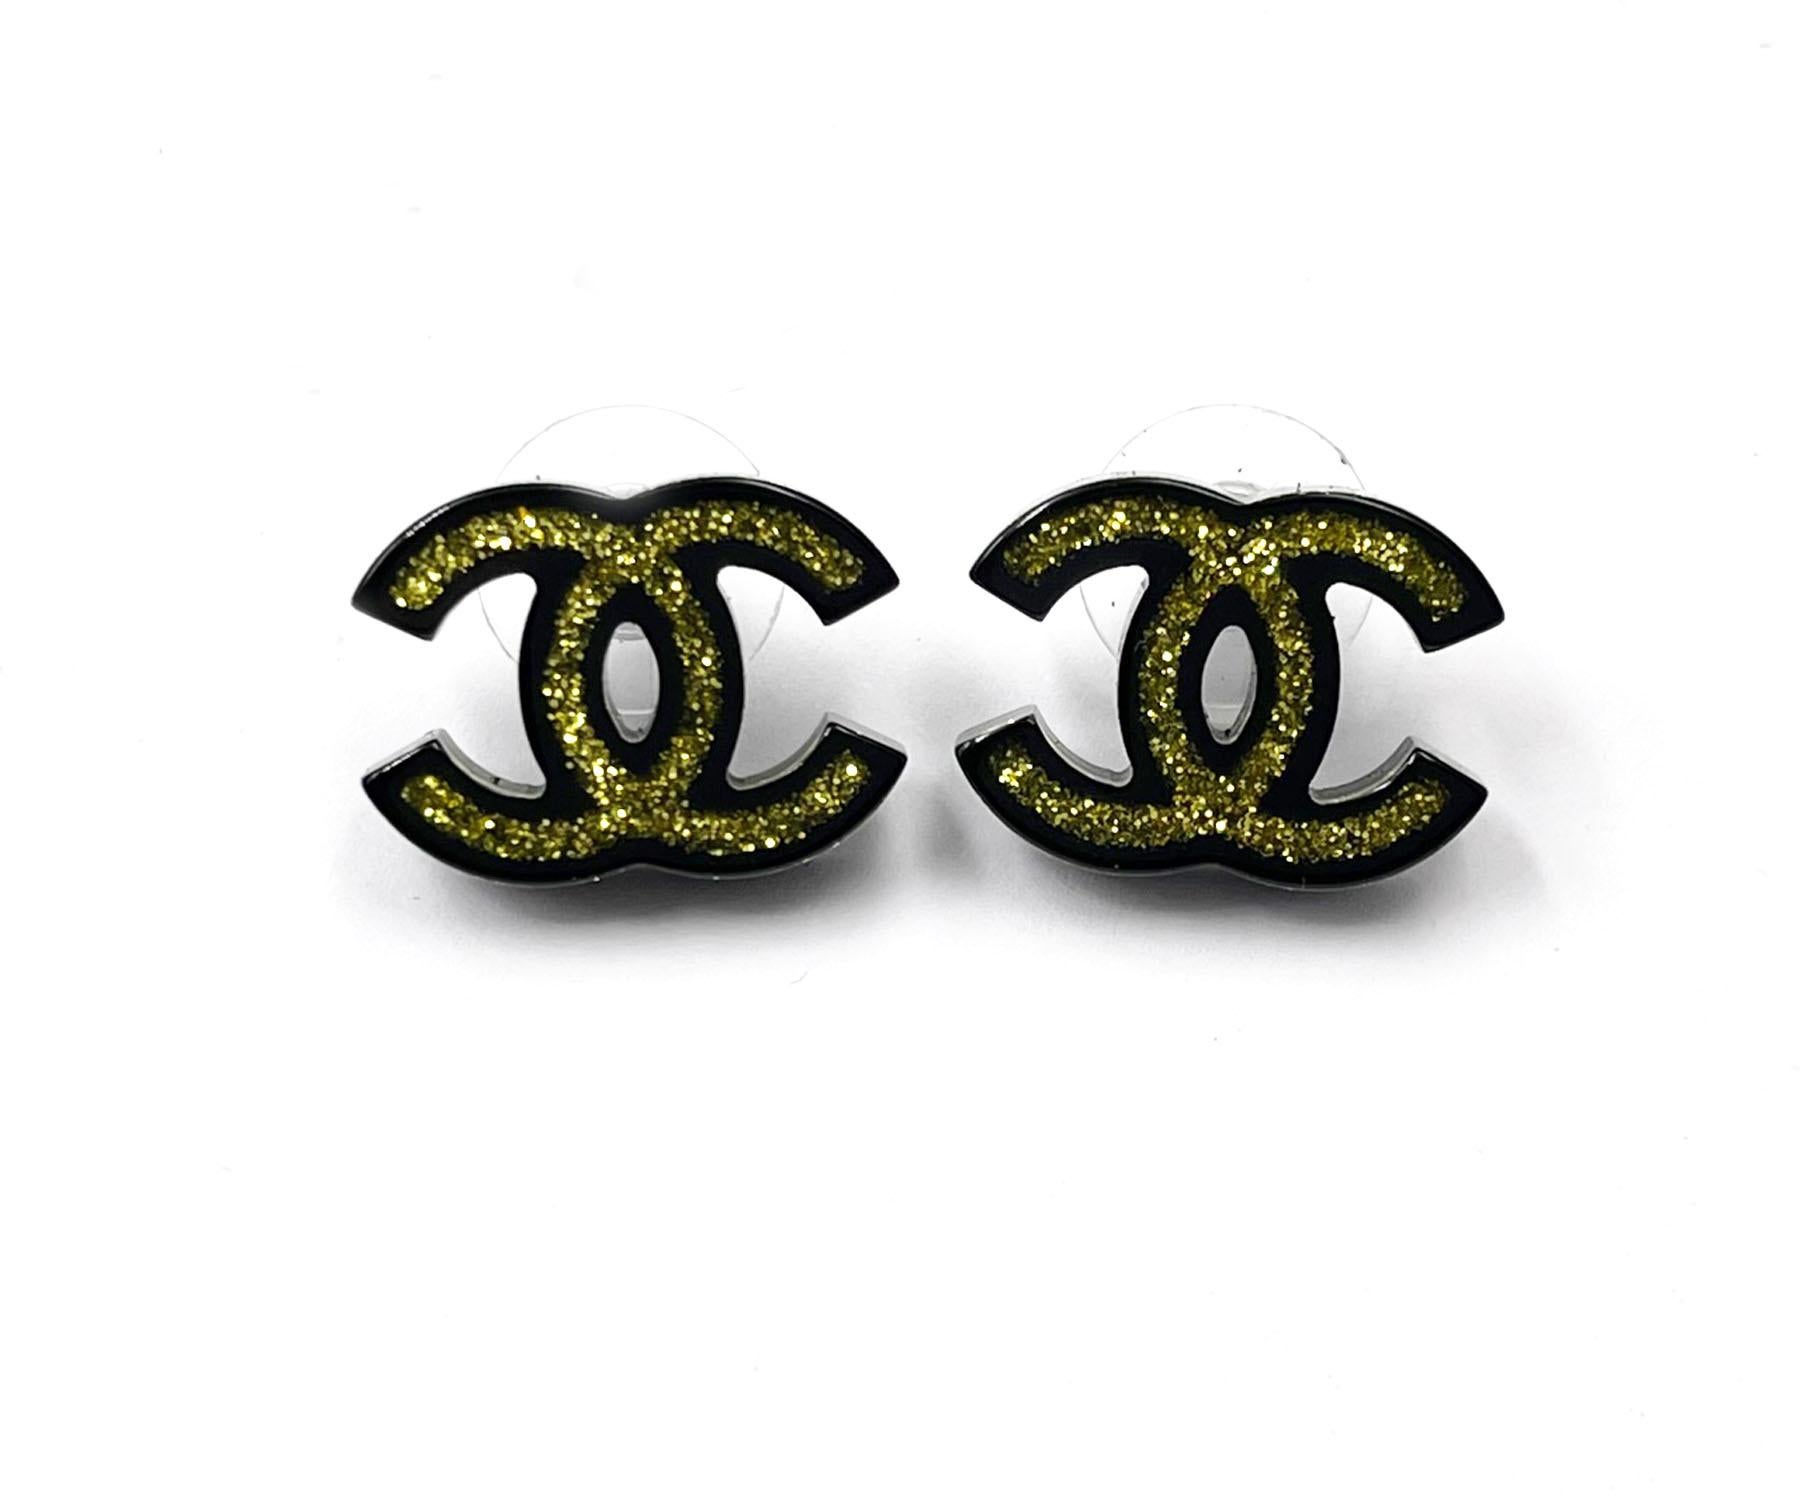 Chanel Black Resin CC Gold Glitter Piercing Earrings

*Marked 17
*Made in France
*Comes with the original box and pouch

-It is approximately 0.75